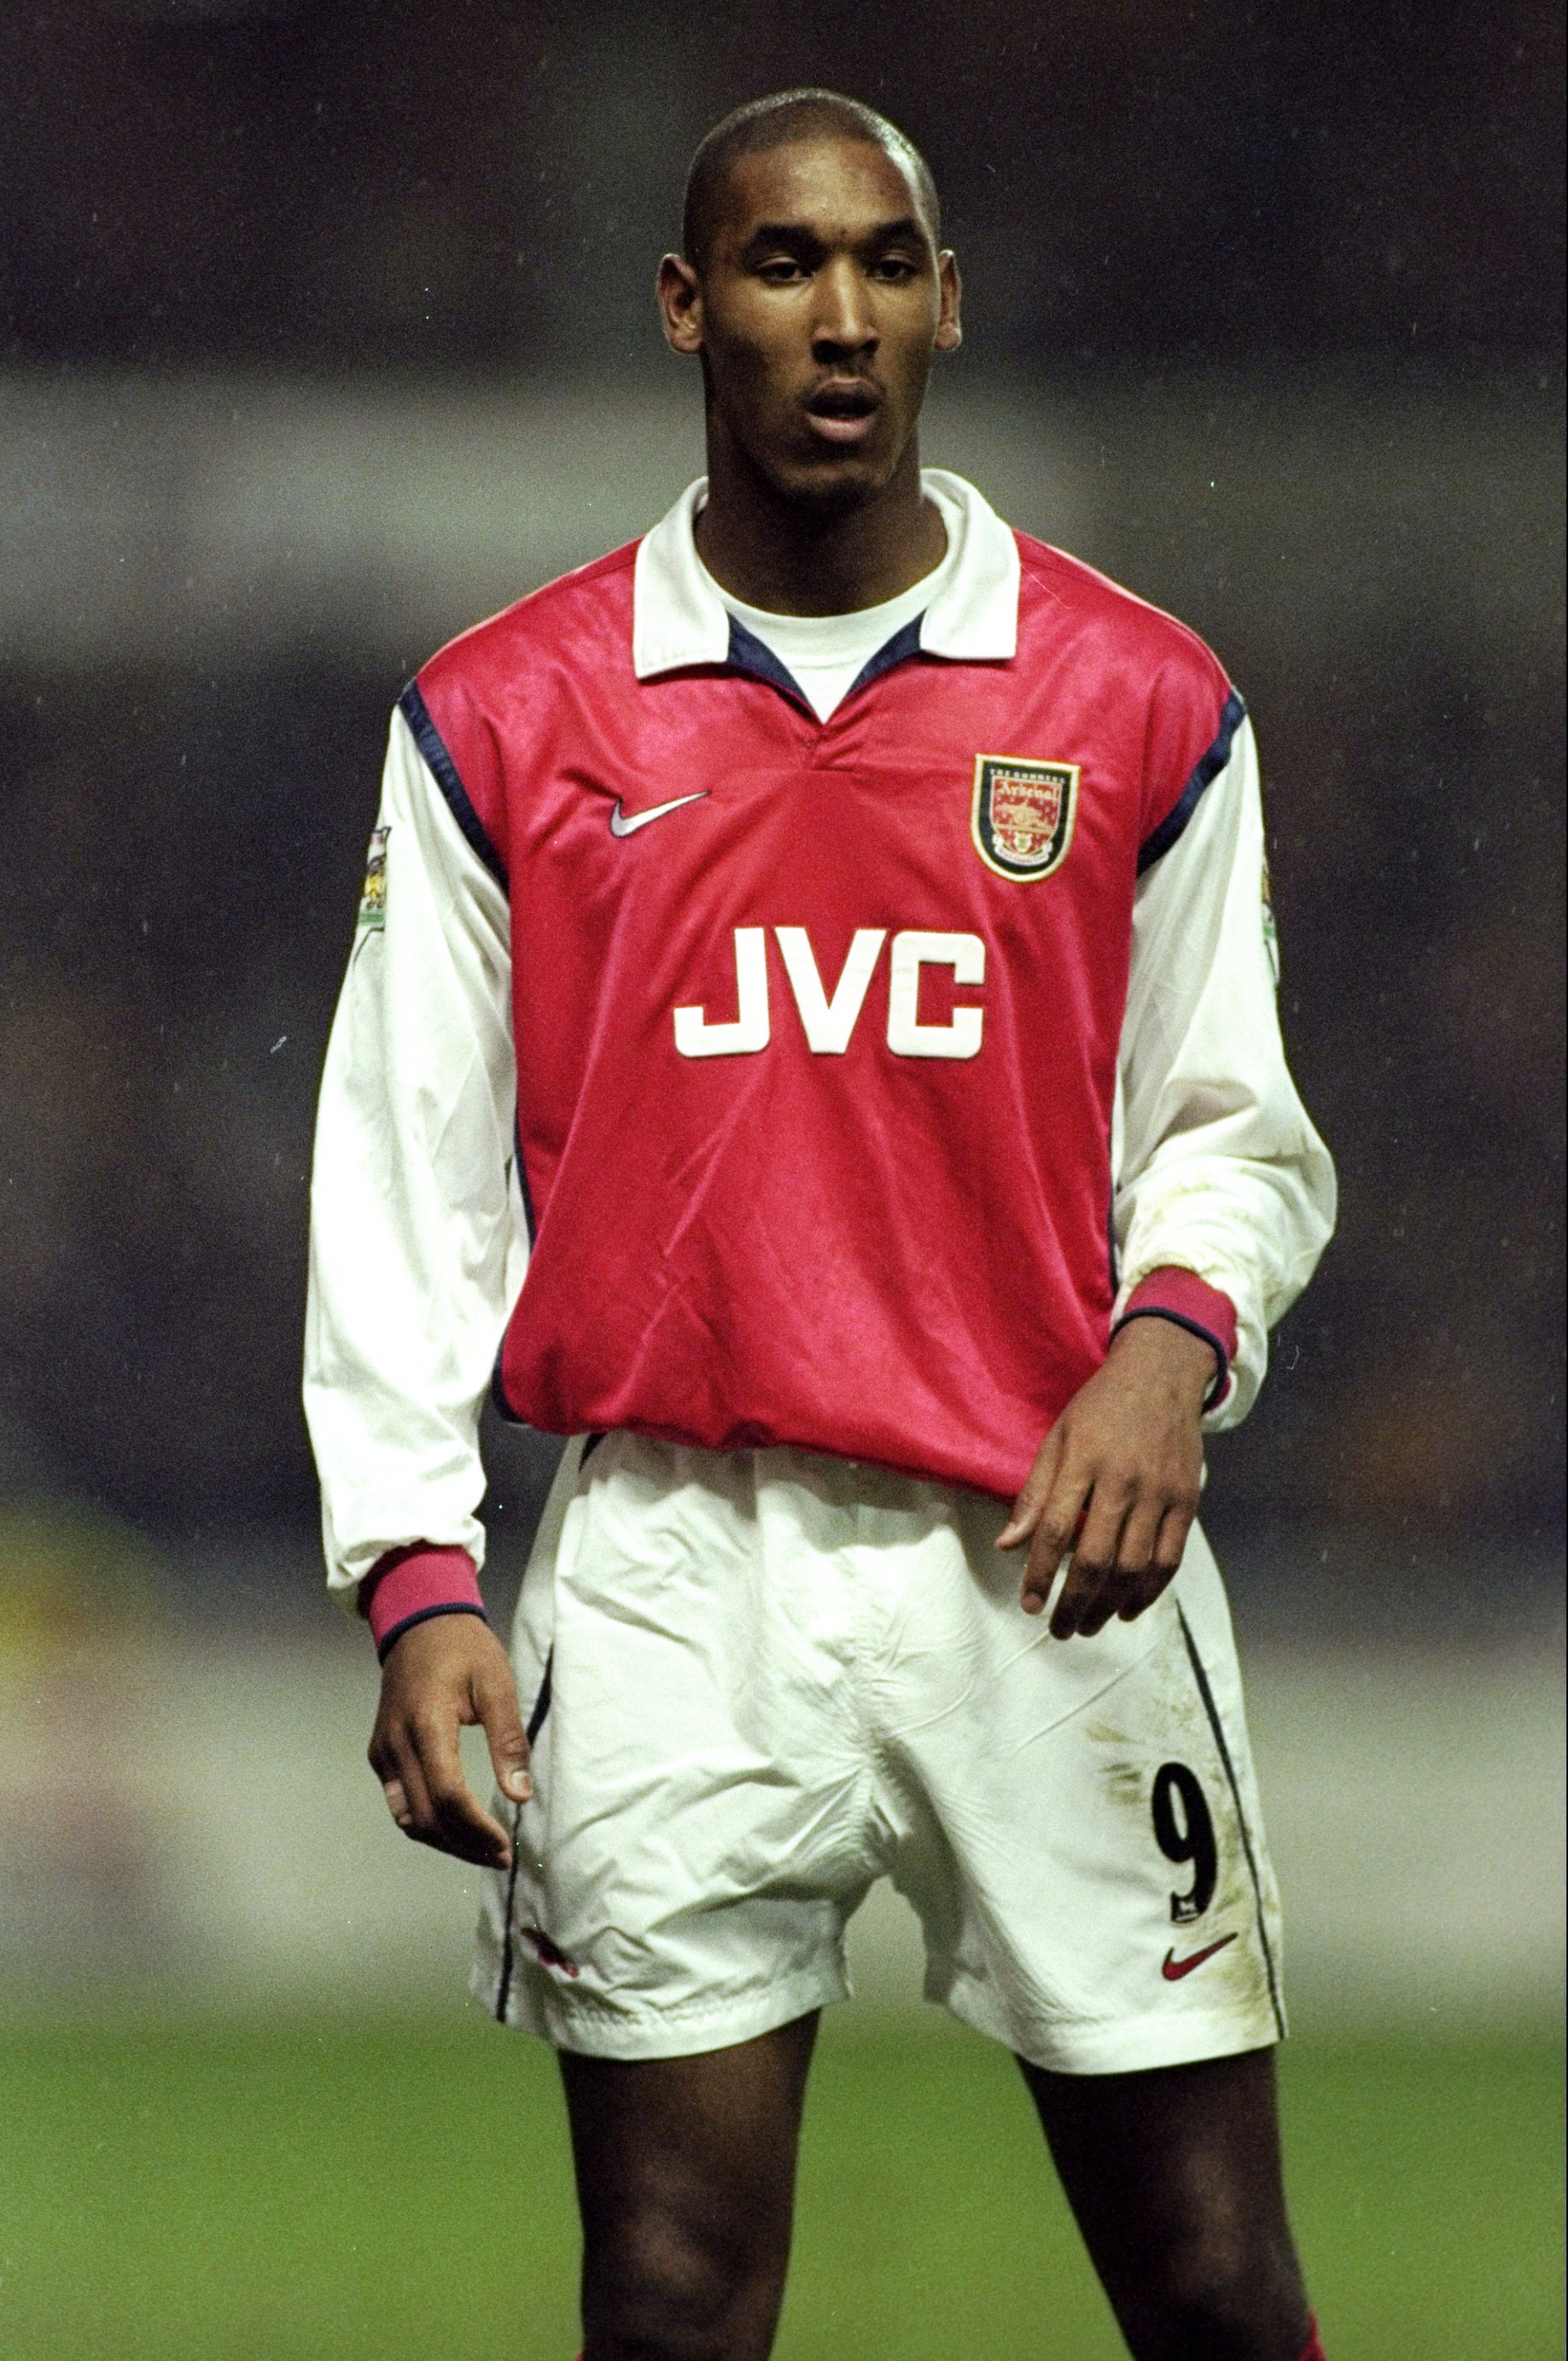 24 Jan 1999:  Nicolas Anelka of Arsenal in action during the AXA FA Cup 4th Round match against Wolverhampton Wanderers played at Molineux in Wolverhampton, England.  The match finished in a 1-2 win for Arsenal. \ Mandatory Credit: Laurence Griffiths /All